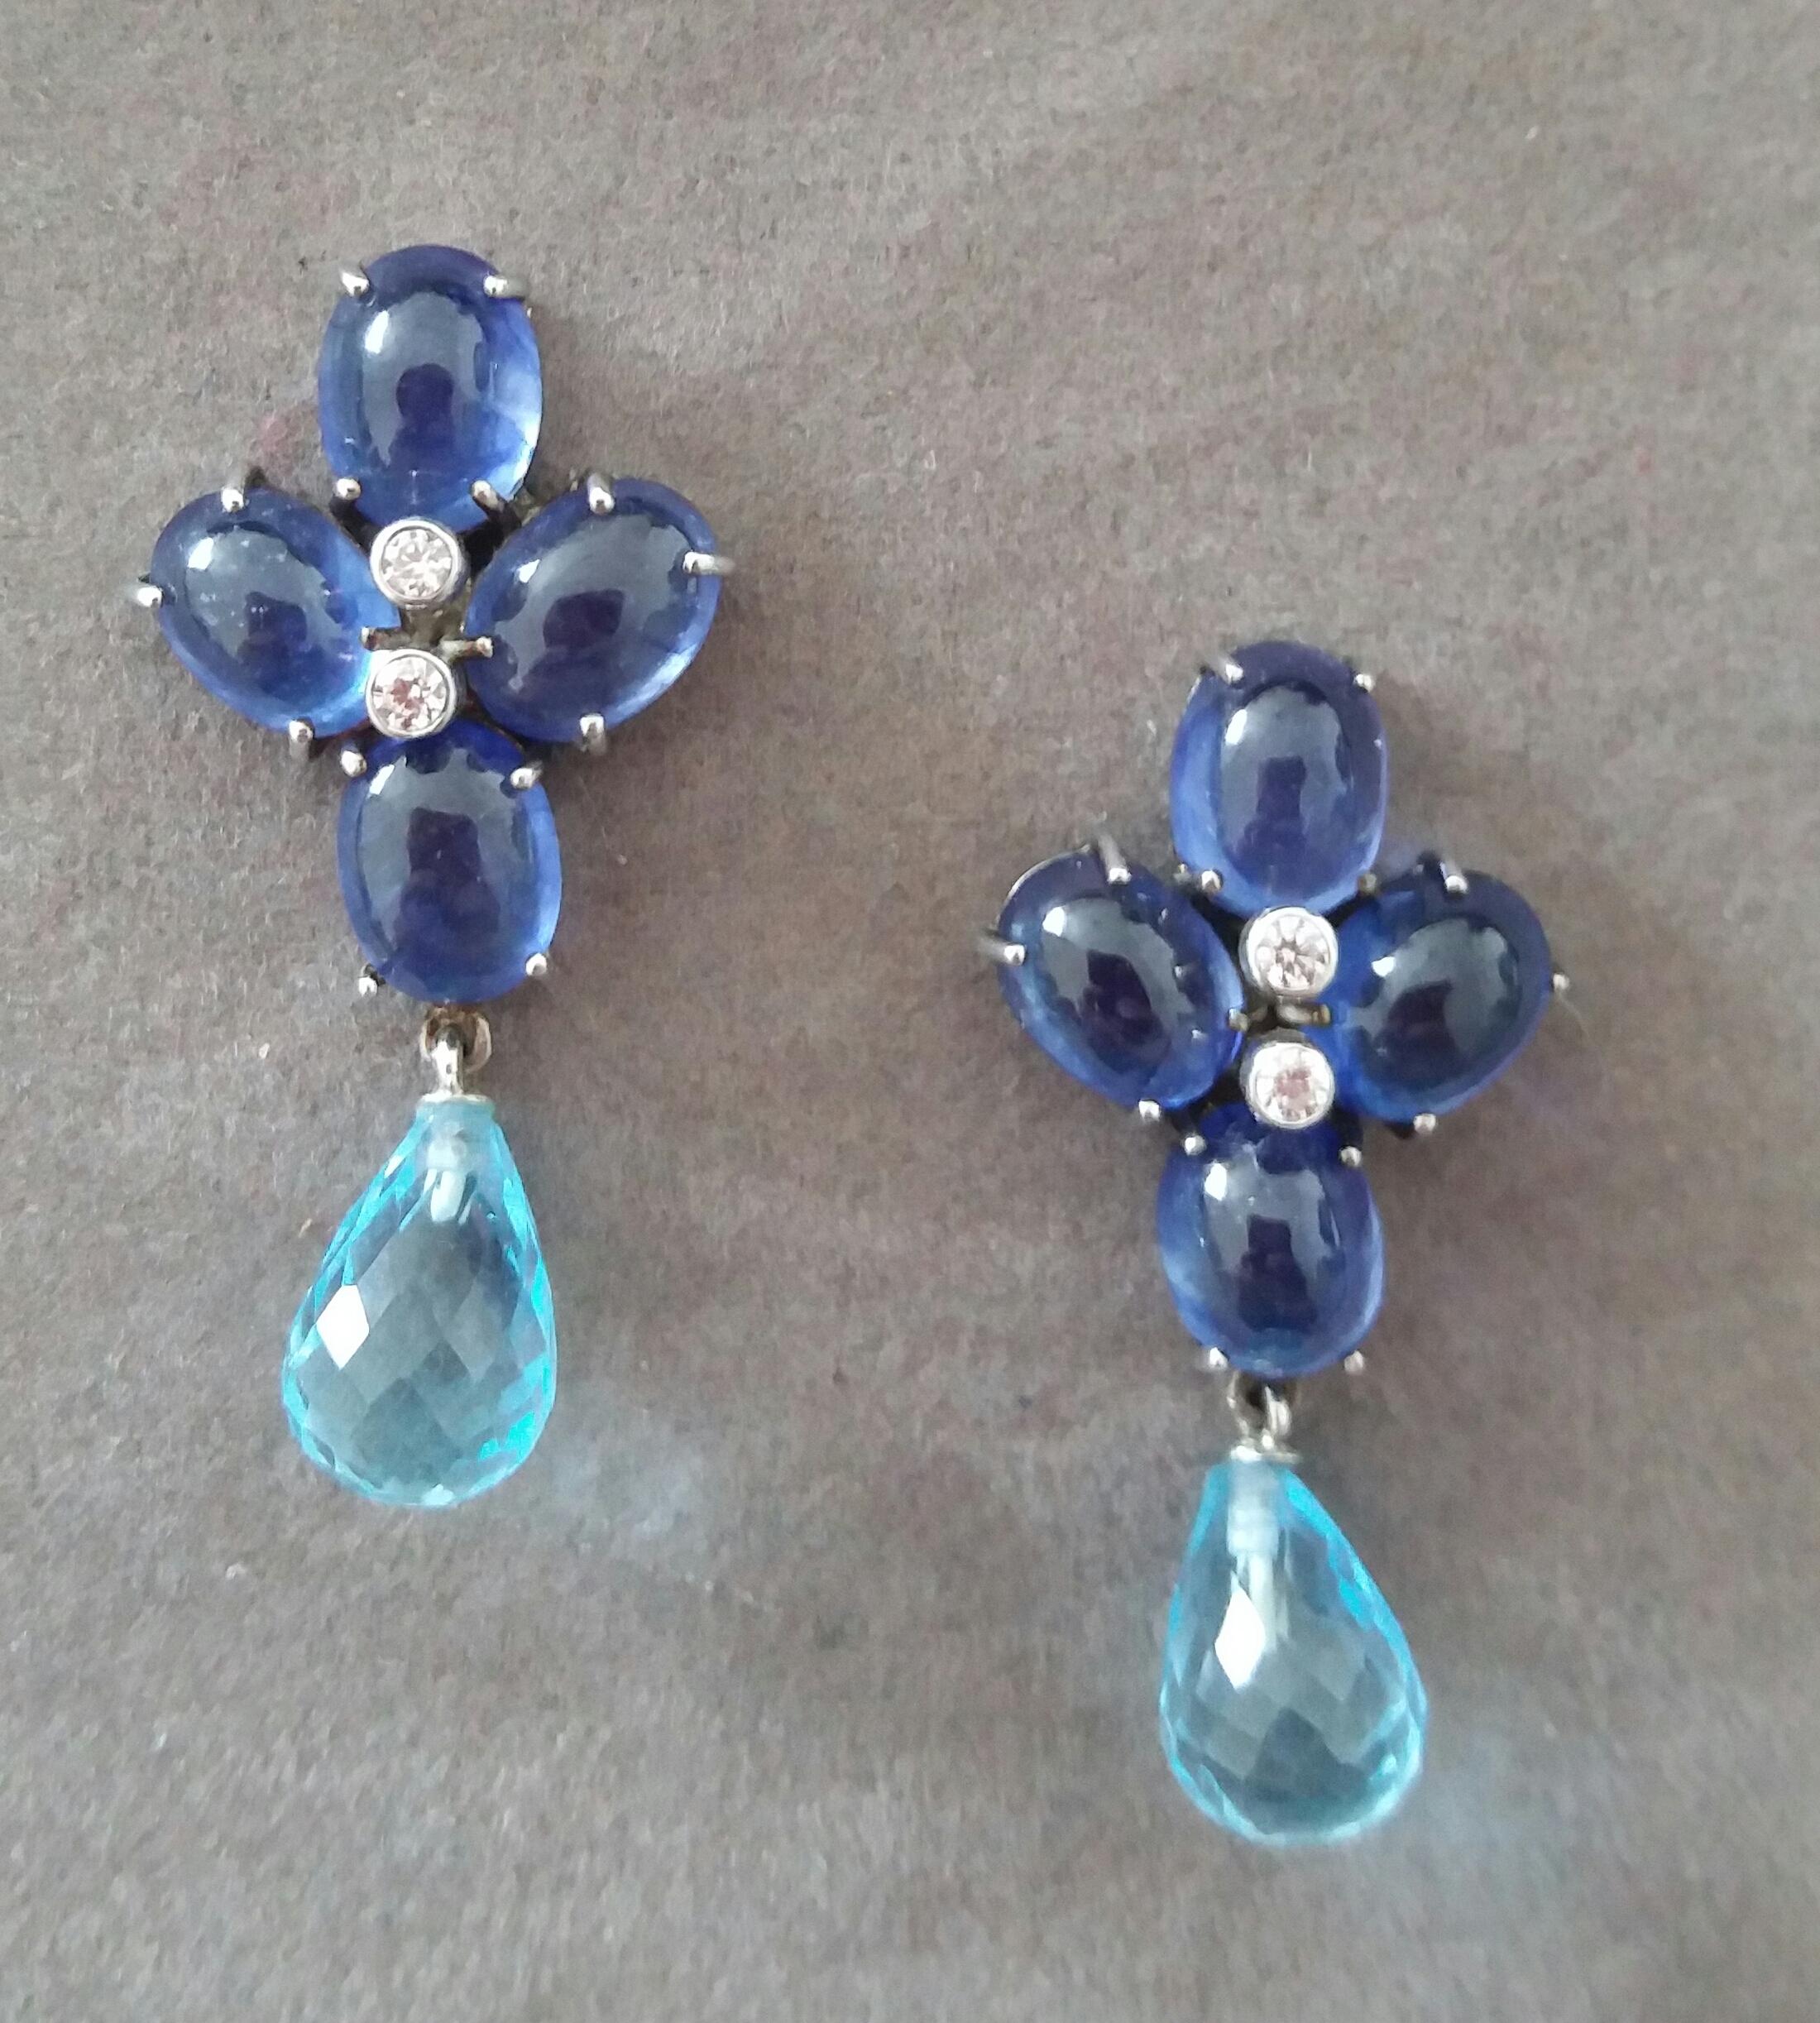 Elegant and completely handmade Earrings consisting of an upper part of 4 oval shape Blue Sapphires 6x8 mm  and weighing 20 Carats set together in 14 Kt white gold with 2 small diamonds in the center, at the bottom we have 2 Faceted Sky Blue Topaz